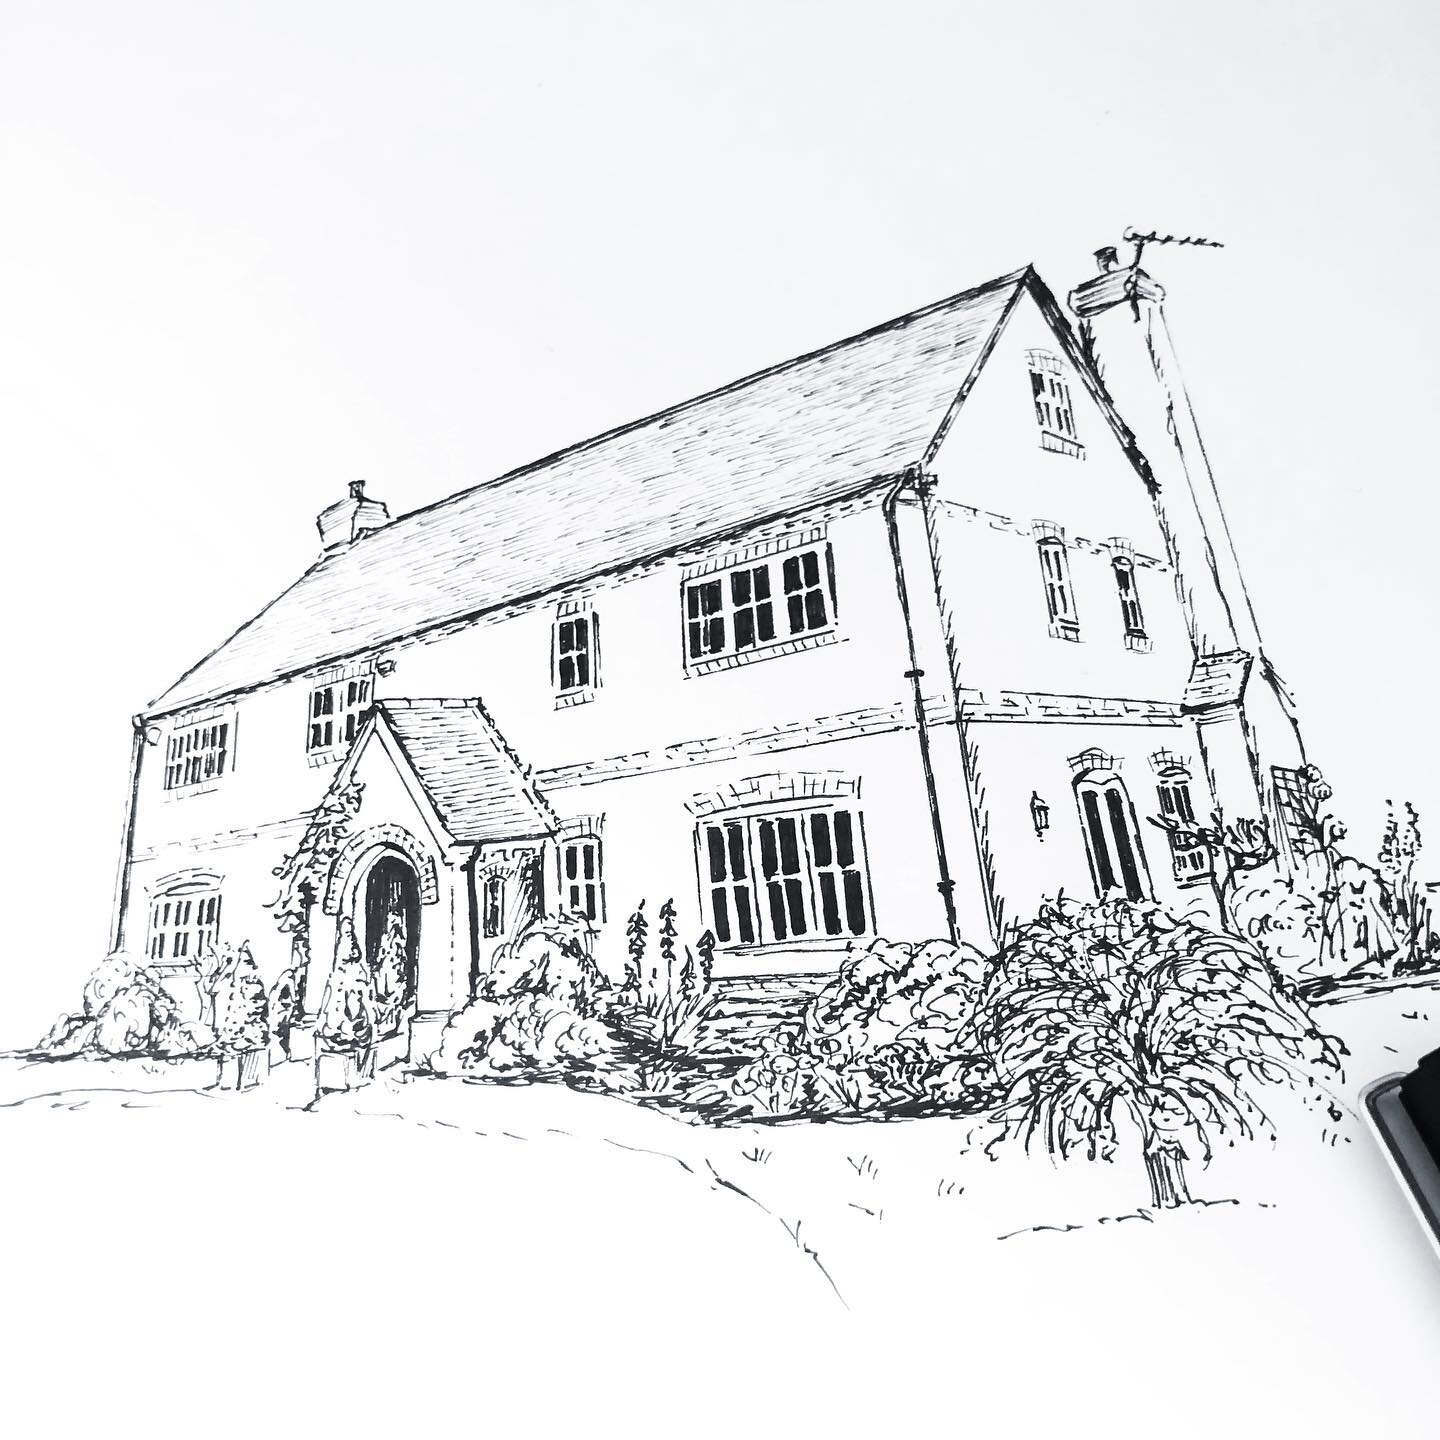 If it&rsquo;s yours &hellip; you&rsquo;ll know &hellip;

House illustration prep for some on the day items.

#illustration #venue #venueillustration #venueillustrations #weddingvenuesuk #weddingvenueillustration #weddingstationery #ontheday #ontheday